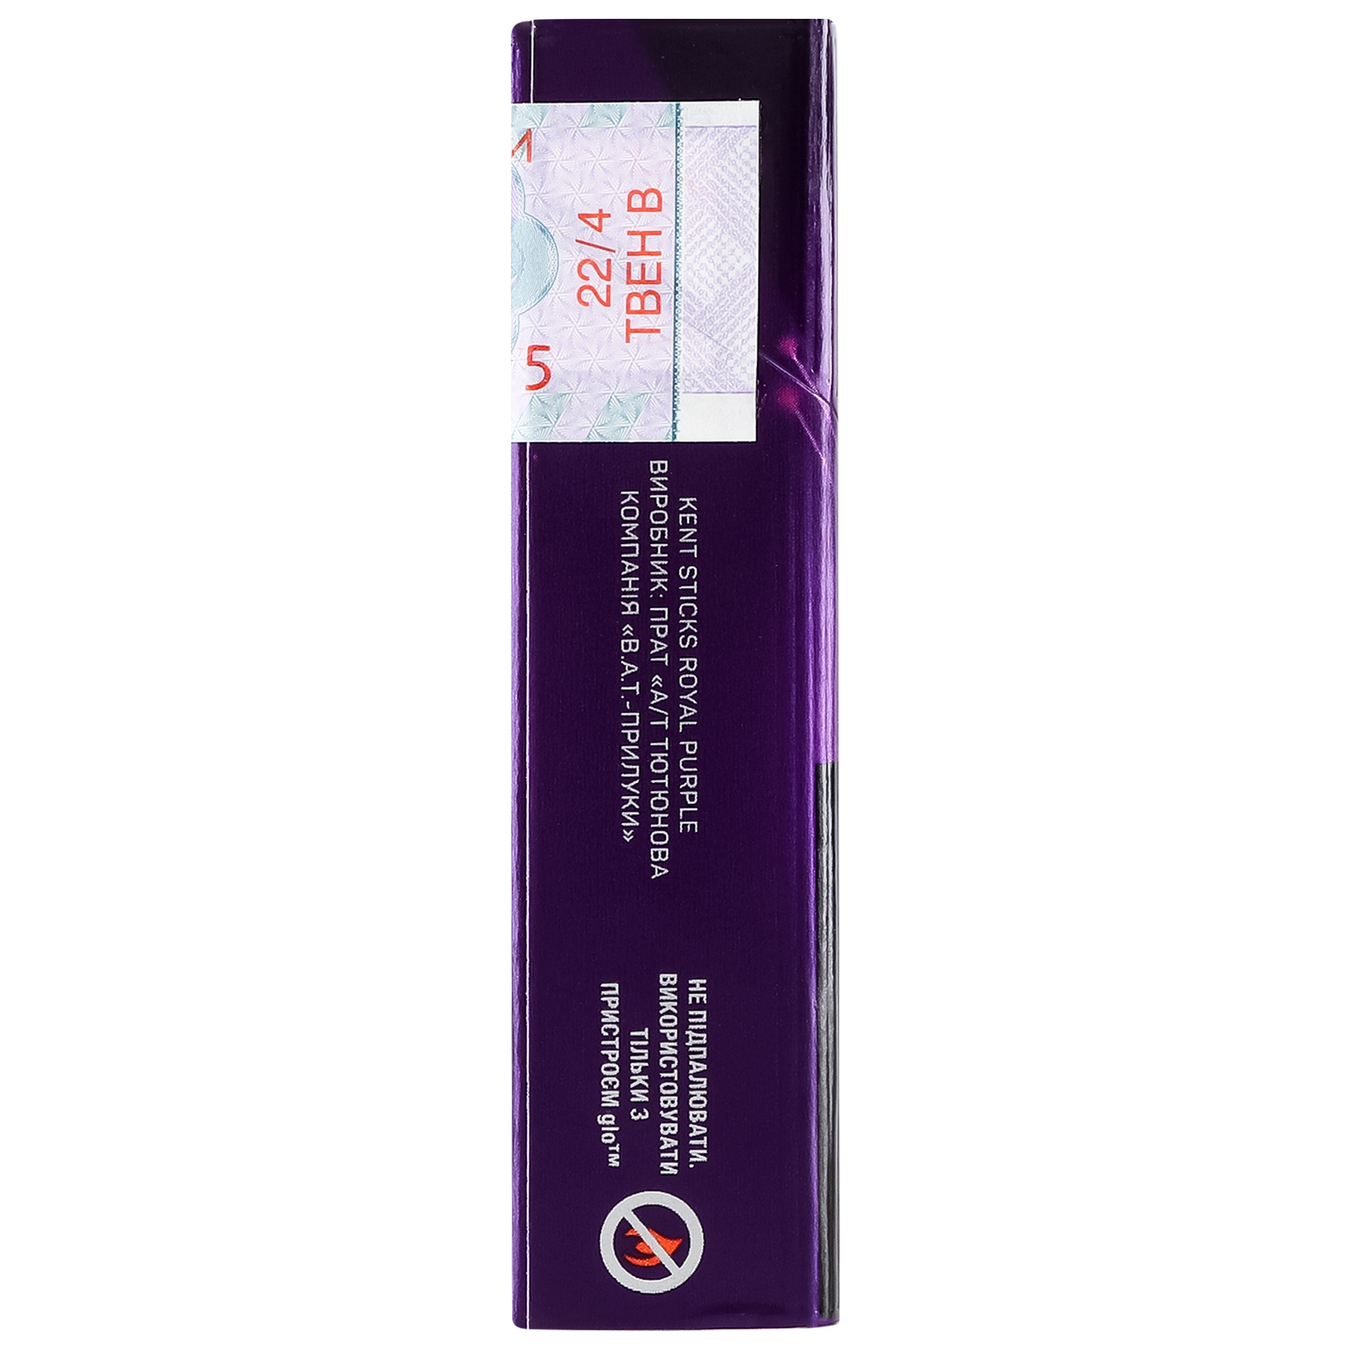 Sticks Kent Demi Royal Purple 20pcs (the price is indicated without excise tax) 2